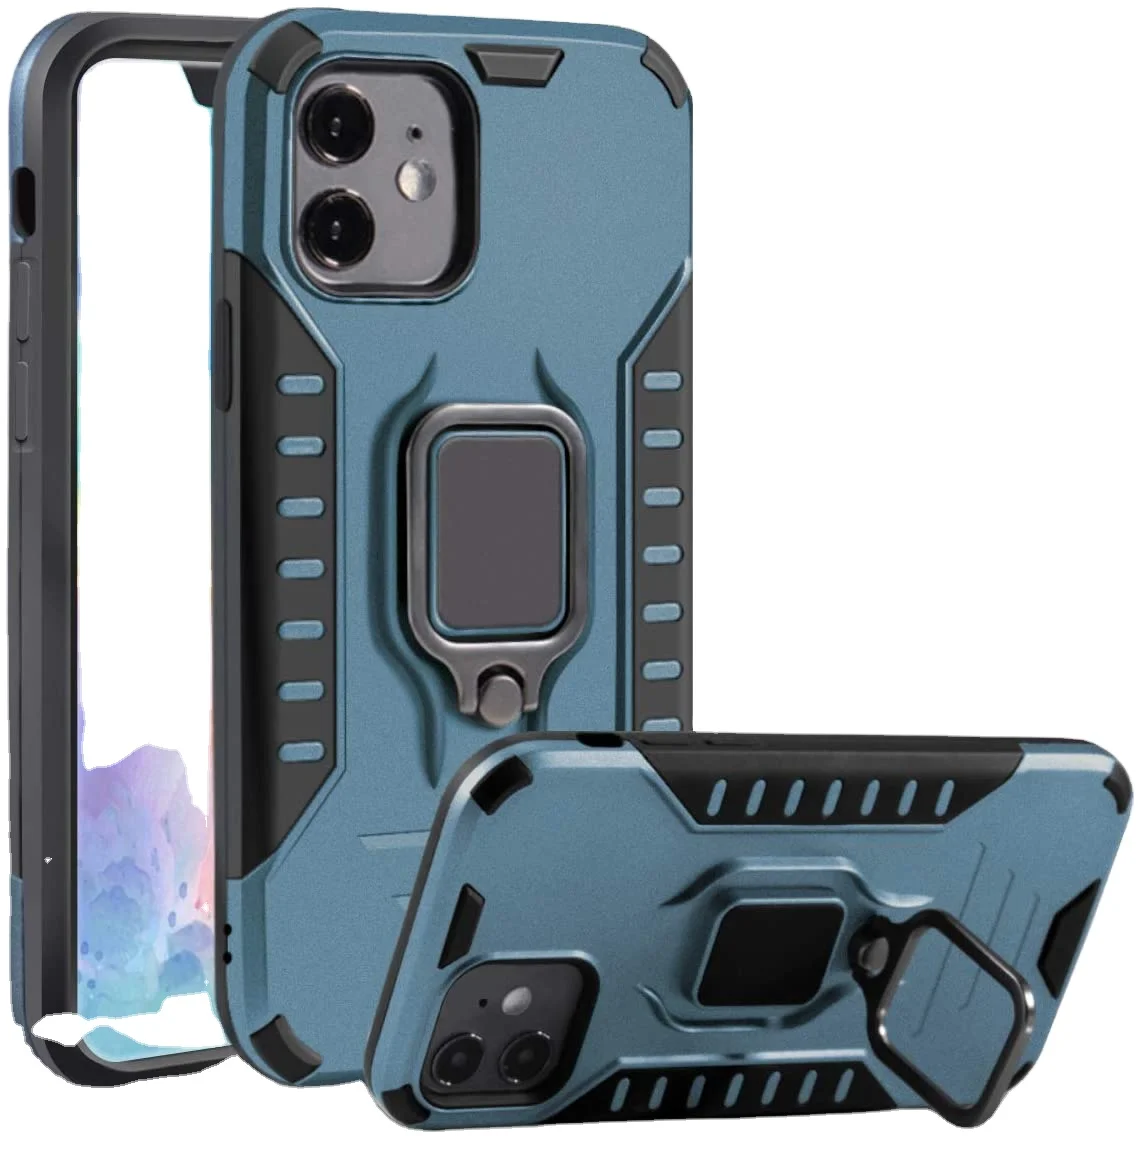 Luxury New Design Mobile Phone Bags Shockproof Bulk Cellphone Accessories Phone Cover For Iphone 11 Pro Max - Buy Accessories,Mobile Covers,Shockproof Phone Case Product on Alibaba.com